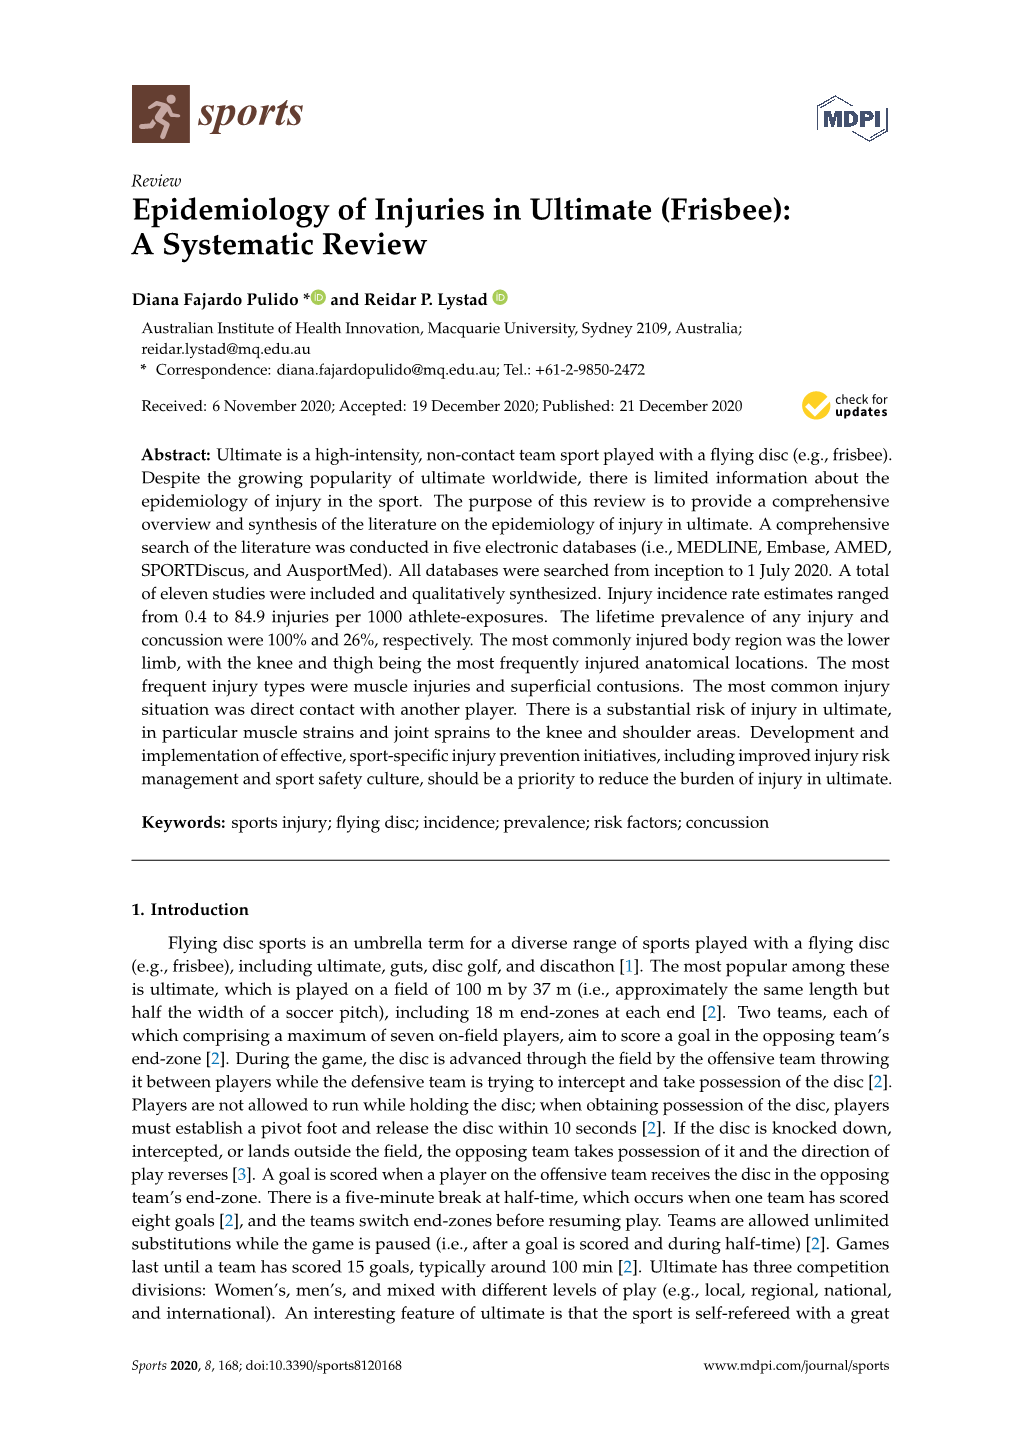 Epidemiology of Injuries in Ultimate (Frisbee): a Systematic Review